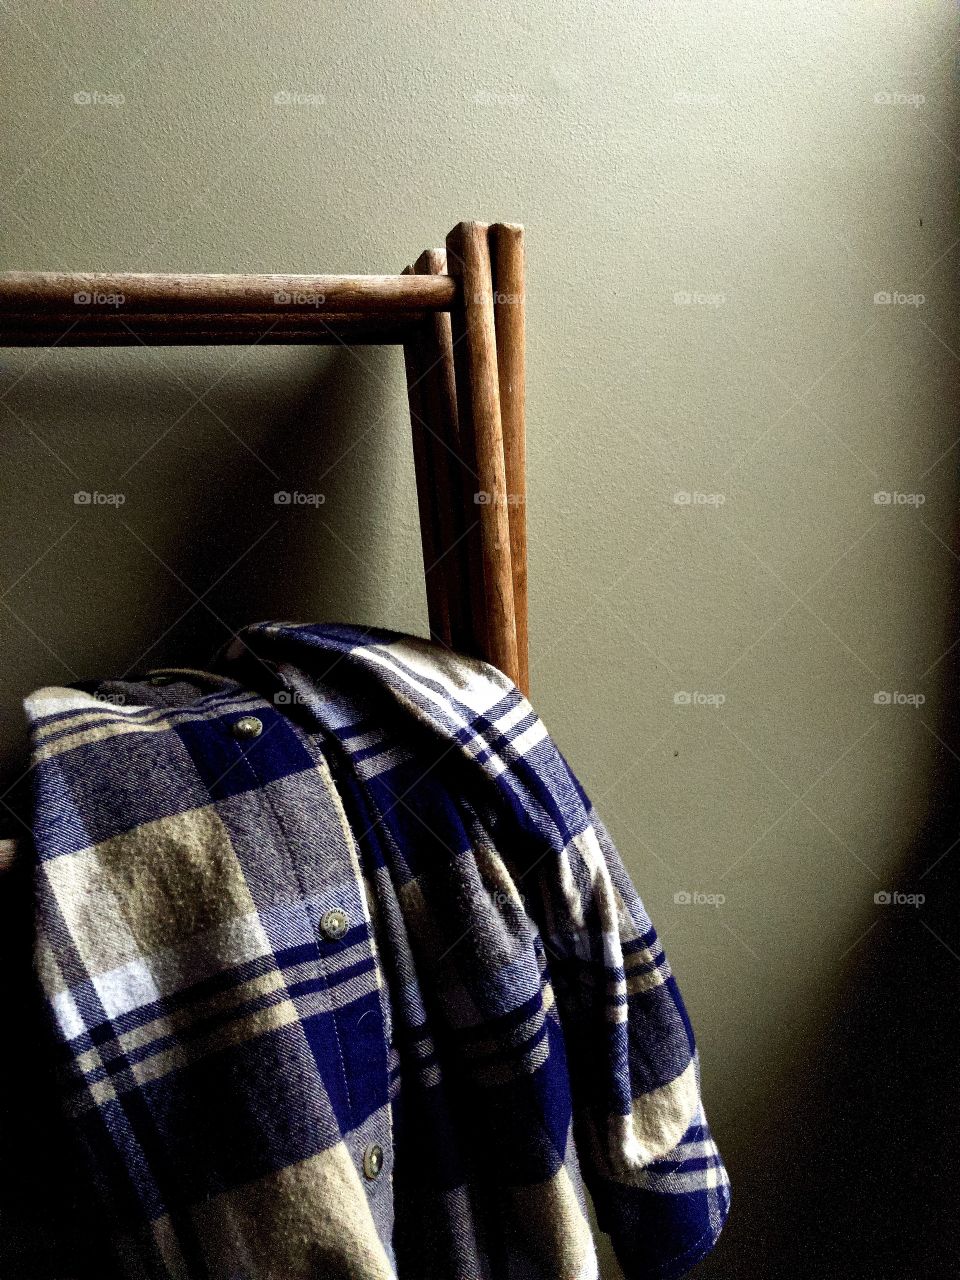 Men’s plaid flannel shirt folded over wooden clothes rack in soft light and shadow